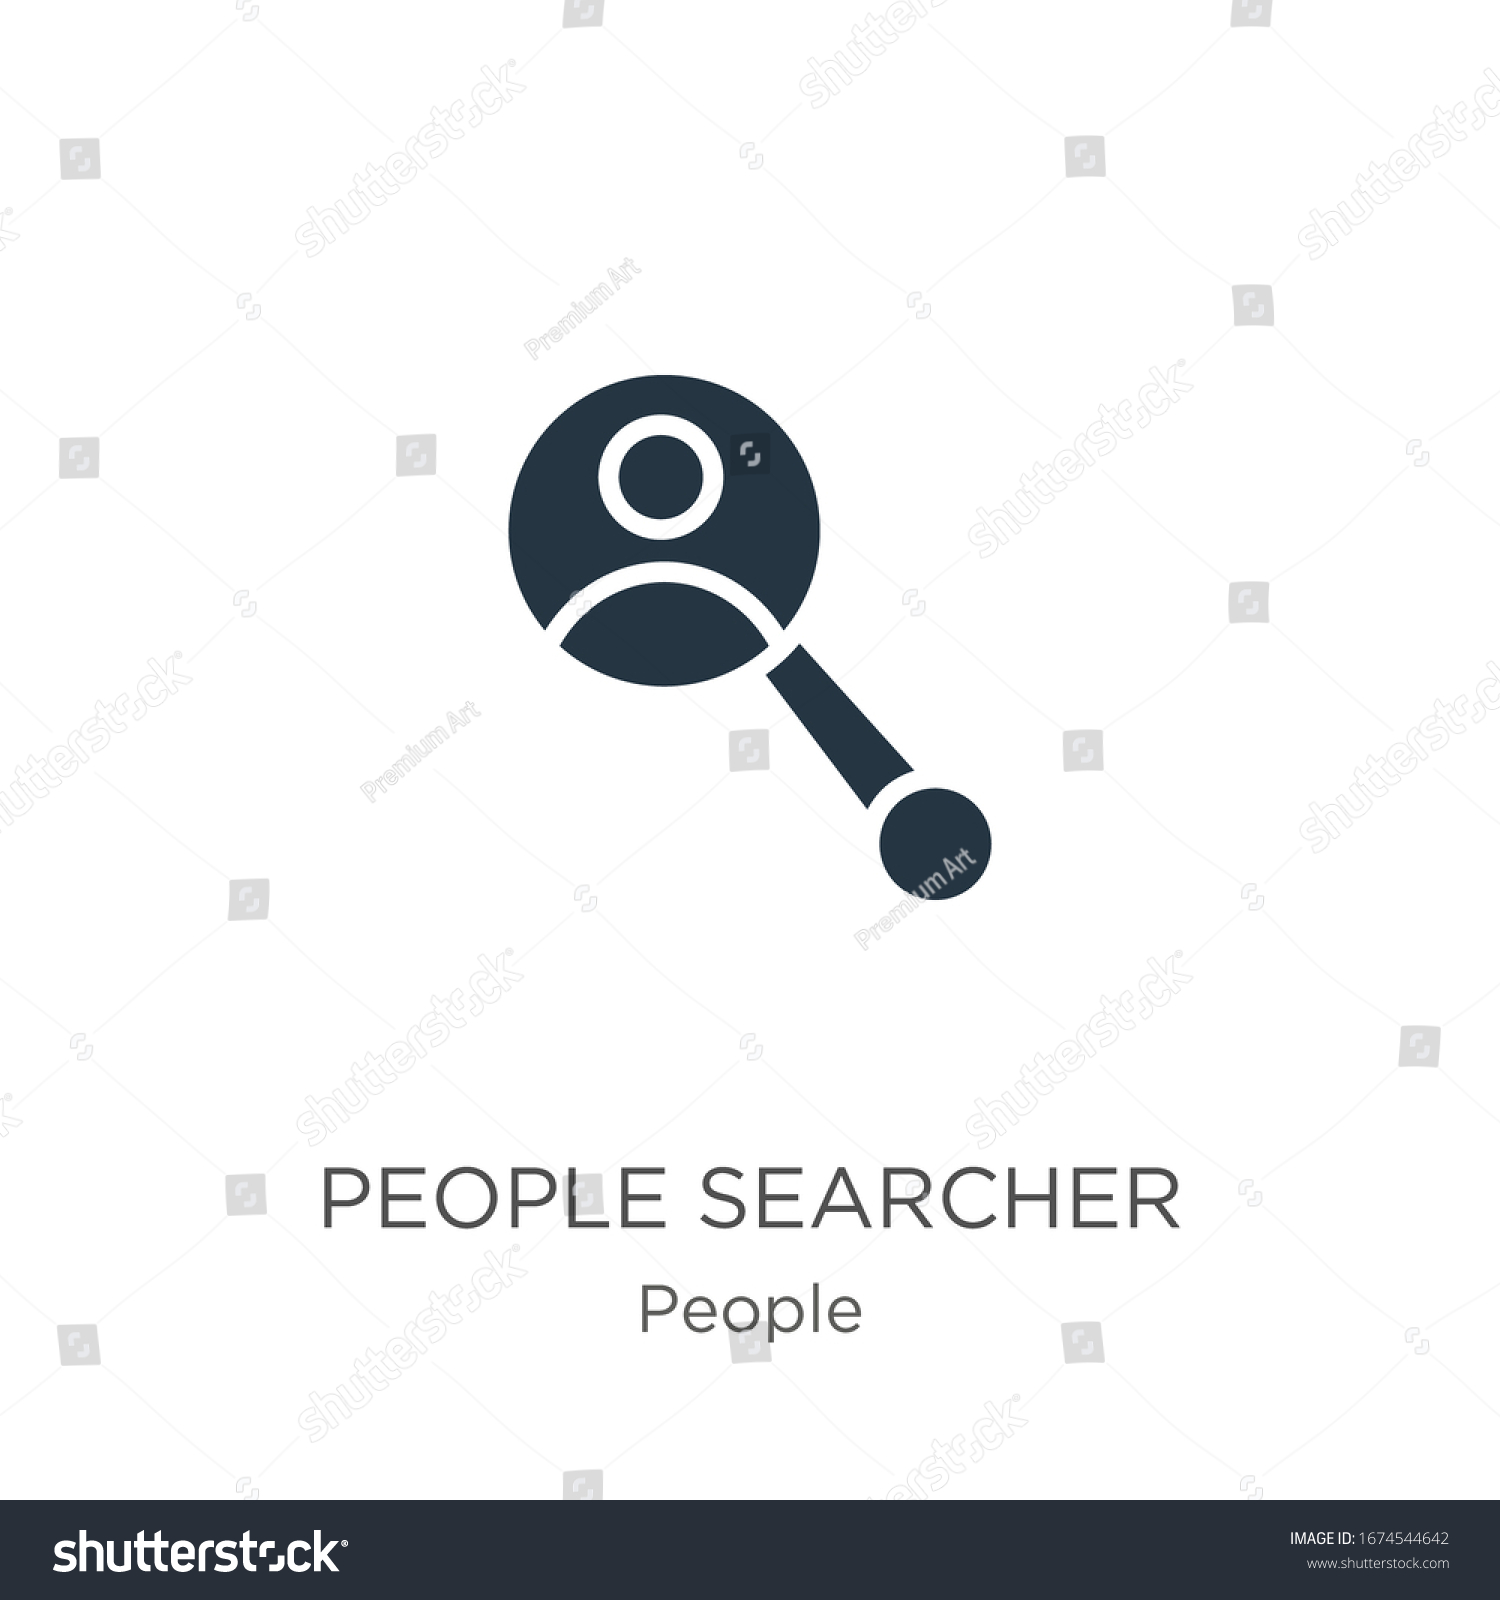 SVG of People searcher icon vector. Trendy flat people searcher icon from people collection isolated on white background. Vector illustration can be used for web and mobile graphic design, logo, eps10 svg